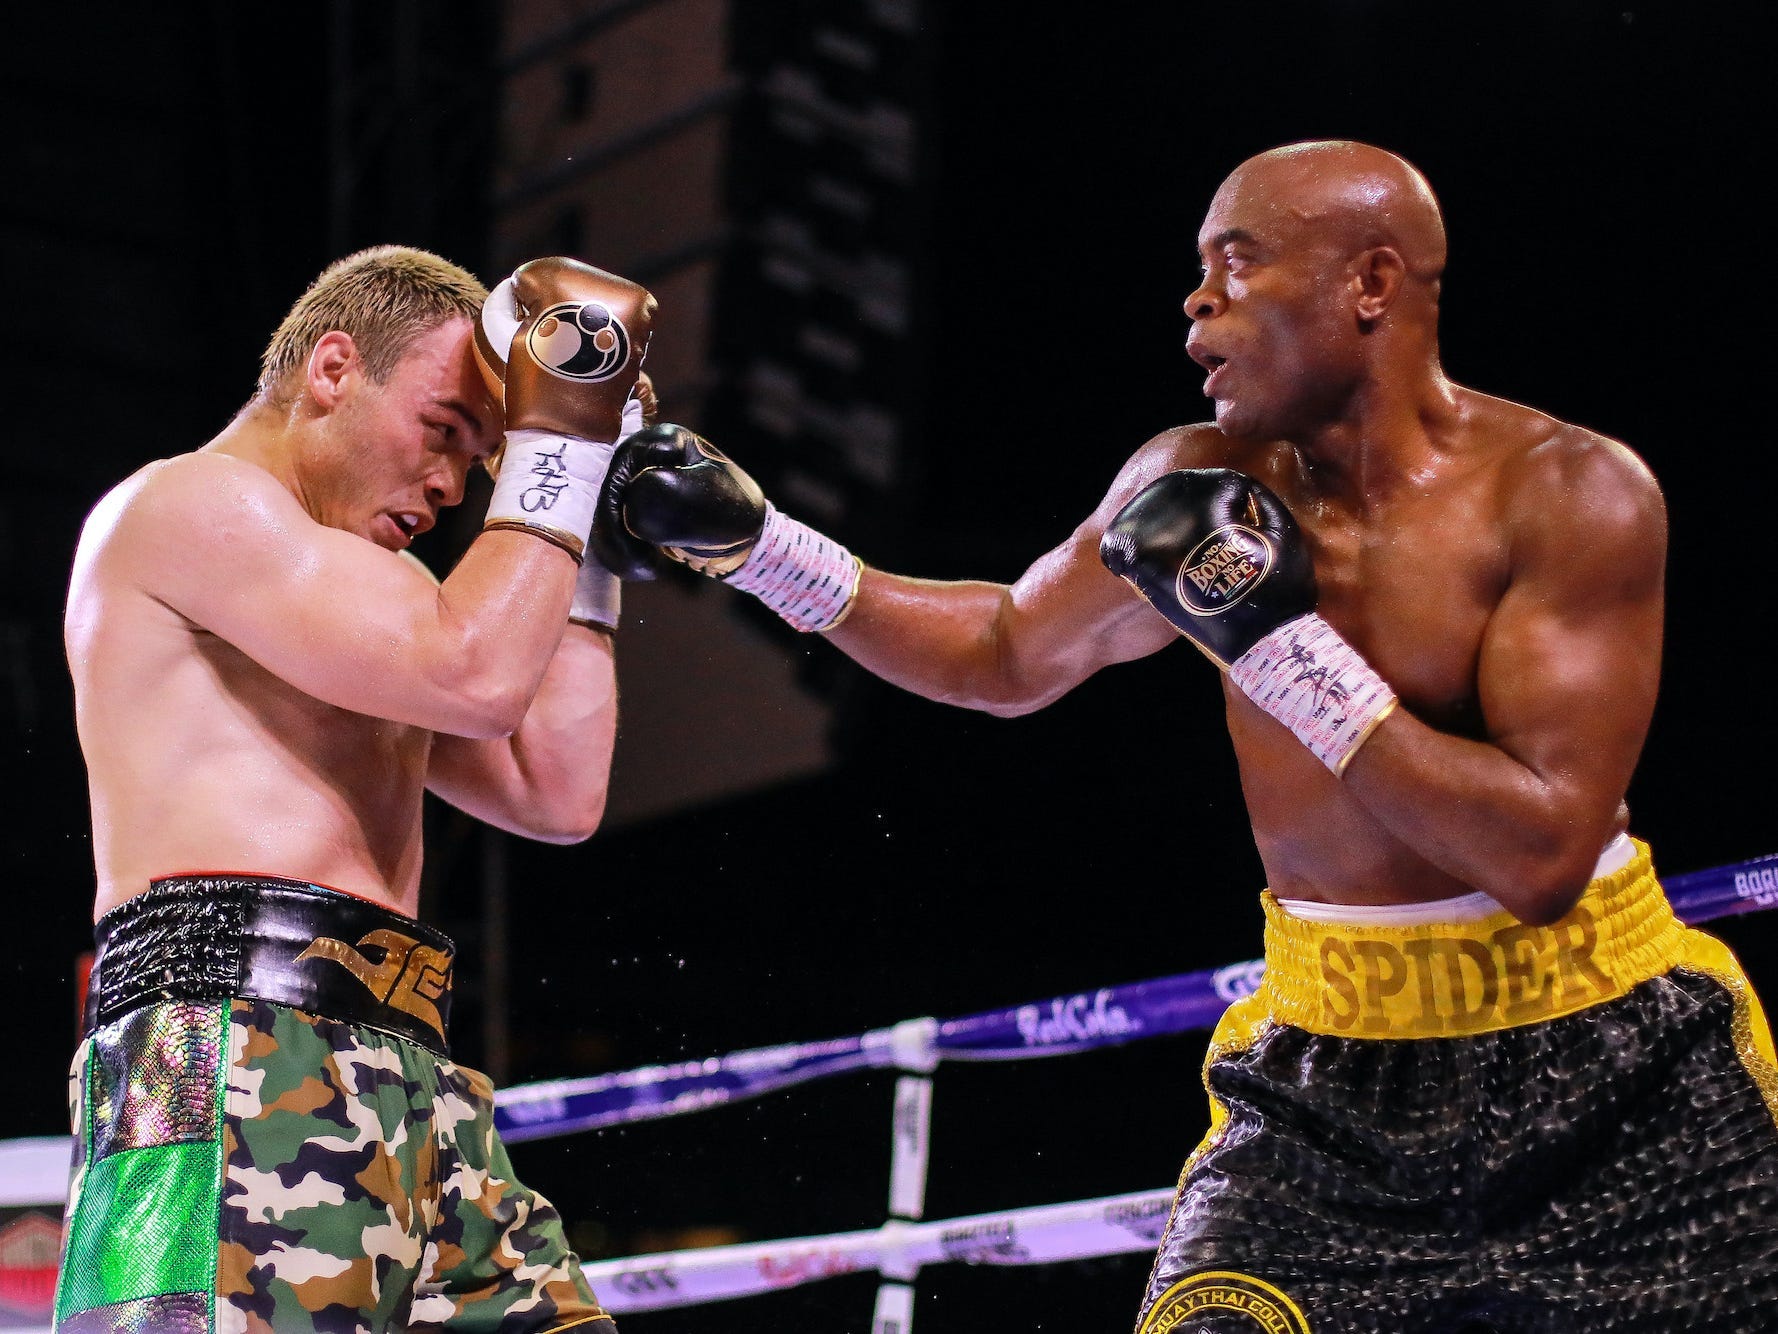 Anderson Silva cruised to an easy win over the former boxing champ Julio Cesar Chavez Jr.